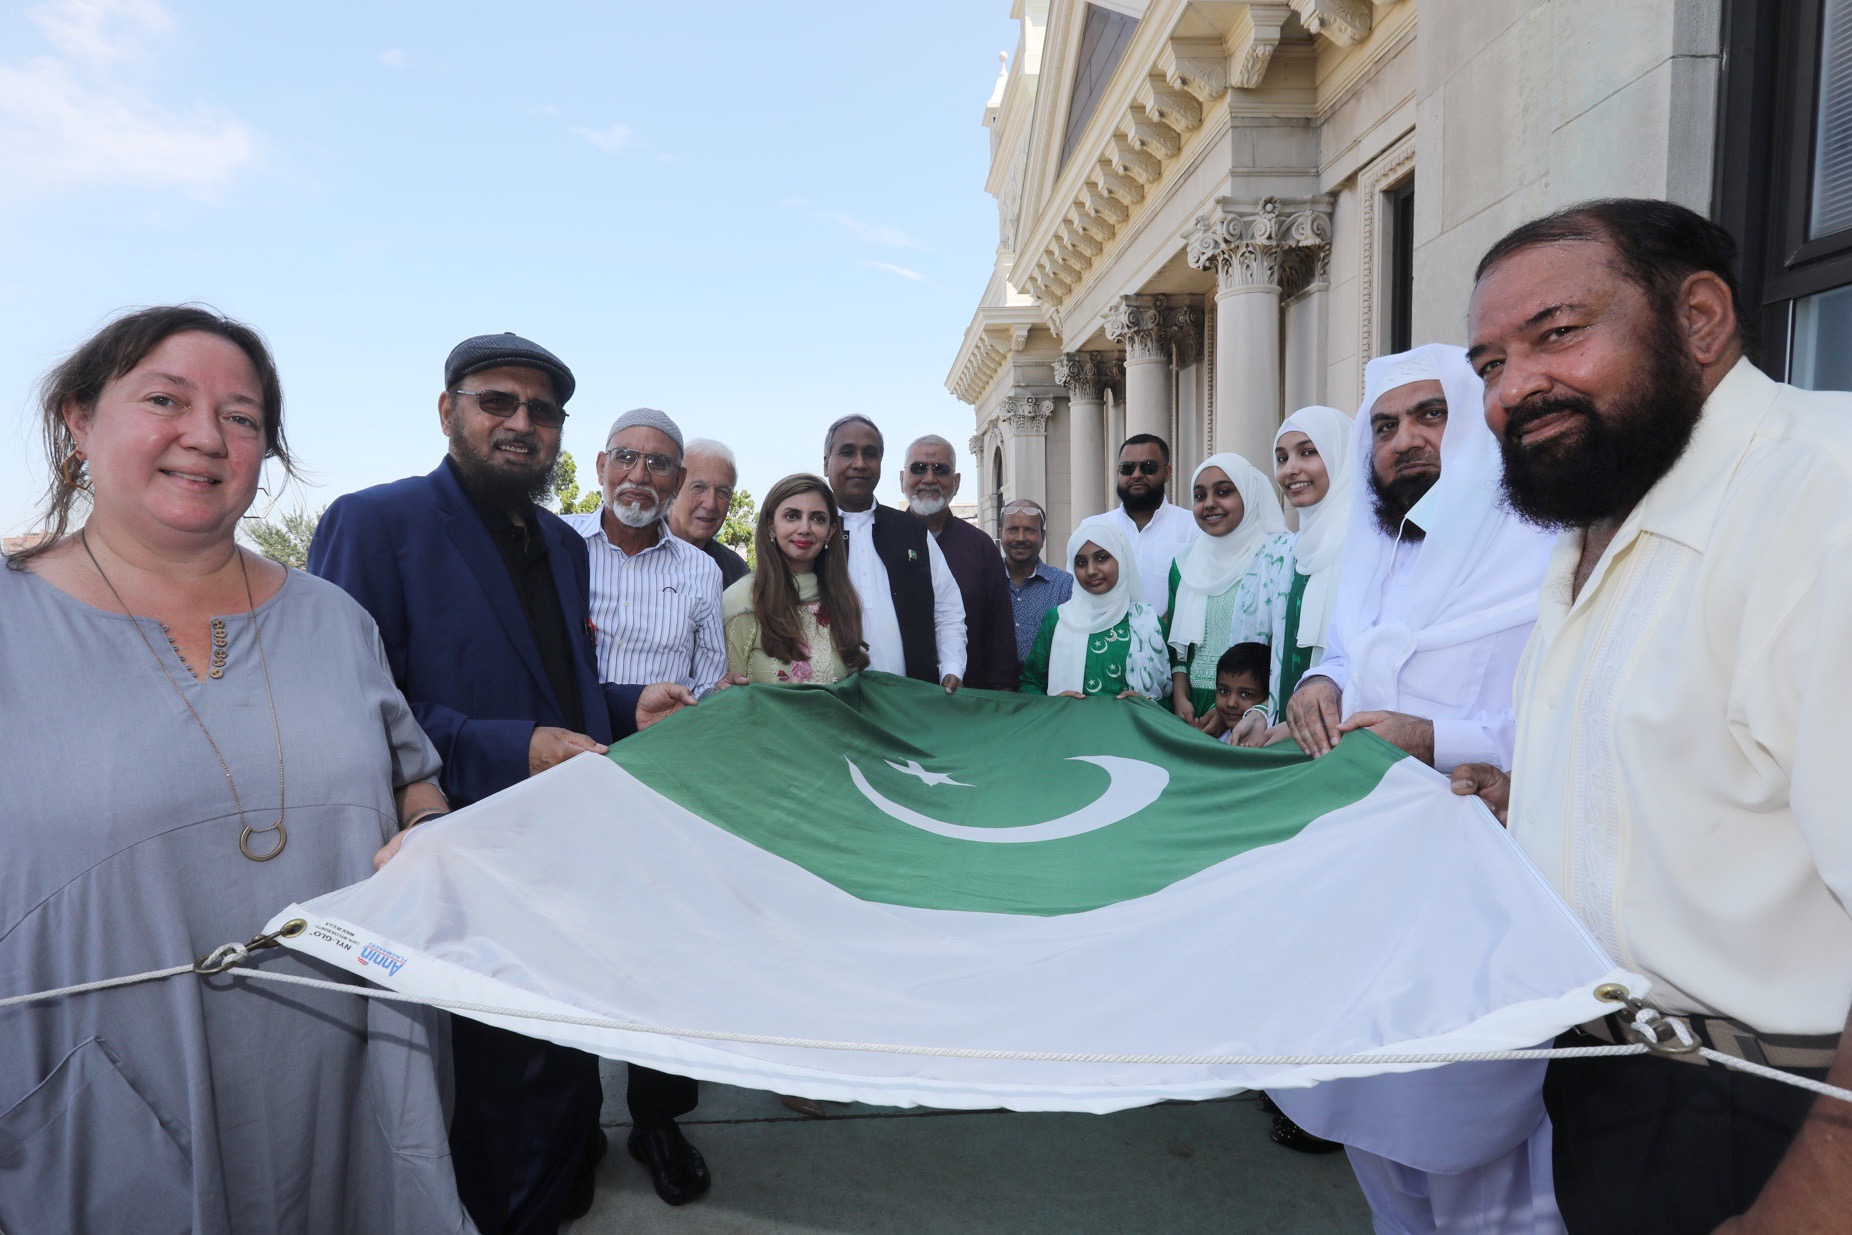 A group of people holding the Pakistan flag before it is raised. The City of Jersey City, Mayor Steven Fulop, Office of Municipal Council and Office of Cultural Affairs are proud to recognize the Muslim Council North America and the Muslim Federation of New Jersey as we celebrate the 74th Anniversary of Independence of Pakistan during the Flag Raising Ceremony on Friday, August 13, 2021. Pakistan, one of the two original successor states to British India, was partitioned along religious lines in 1947. Pakistan achieved its independence on August 14, 1947, with dominion status in the British Commonwealth of Nations. For almost 25 years following independence, it consisted of two separate regions, East and West Pakistan, now only made up of the western sector. The Pakistani community has directly contributed to the diversity and positive growth of Jersey City in various fields, including education, entrepreneurship, government, literature, drama, sculpture, music, food, and culture, as well as all aspects of life throughout the United States and abroad; and continues to influence our beliefs, embedded values and quest for independence. The City of Jersey City and the Pakistani community will proudly fly the flags of the United States and Pakistan high above City Hall in recognition of the cherished cultural and ethnic diversity of our community. It is also a reaffirmation of the long friendship built on common values and an abiding love for freedom..